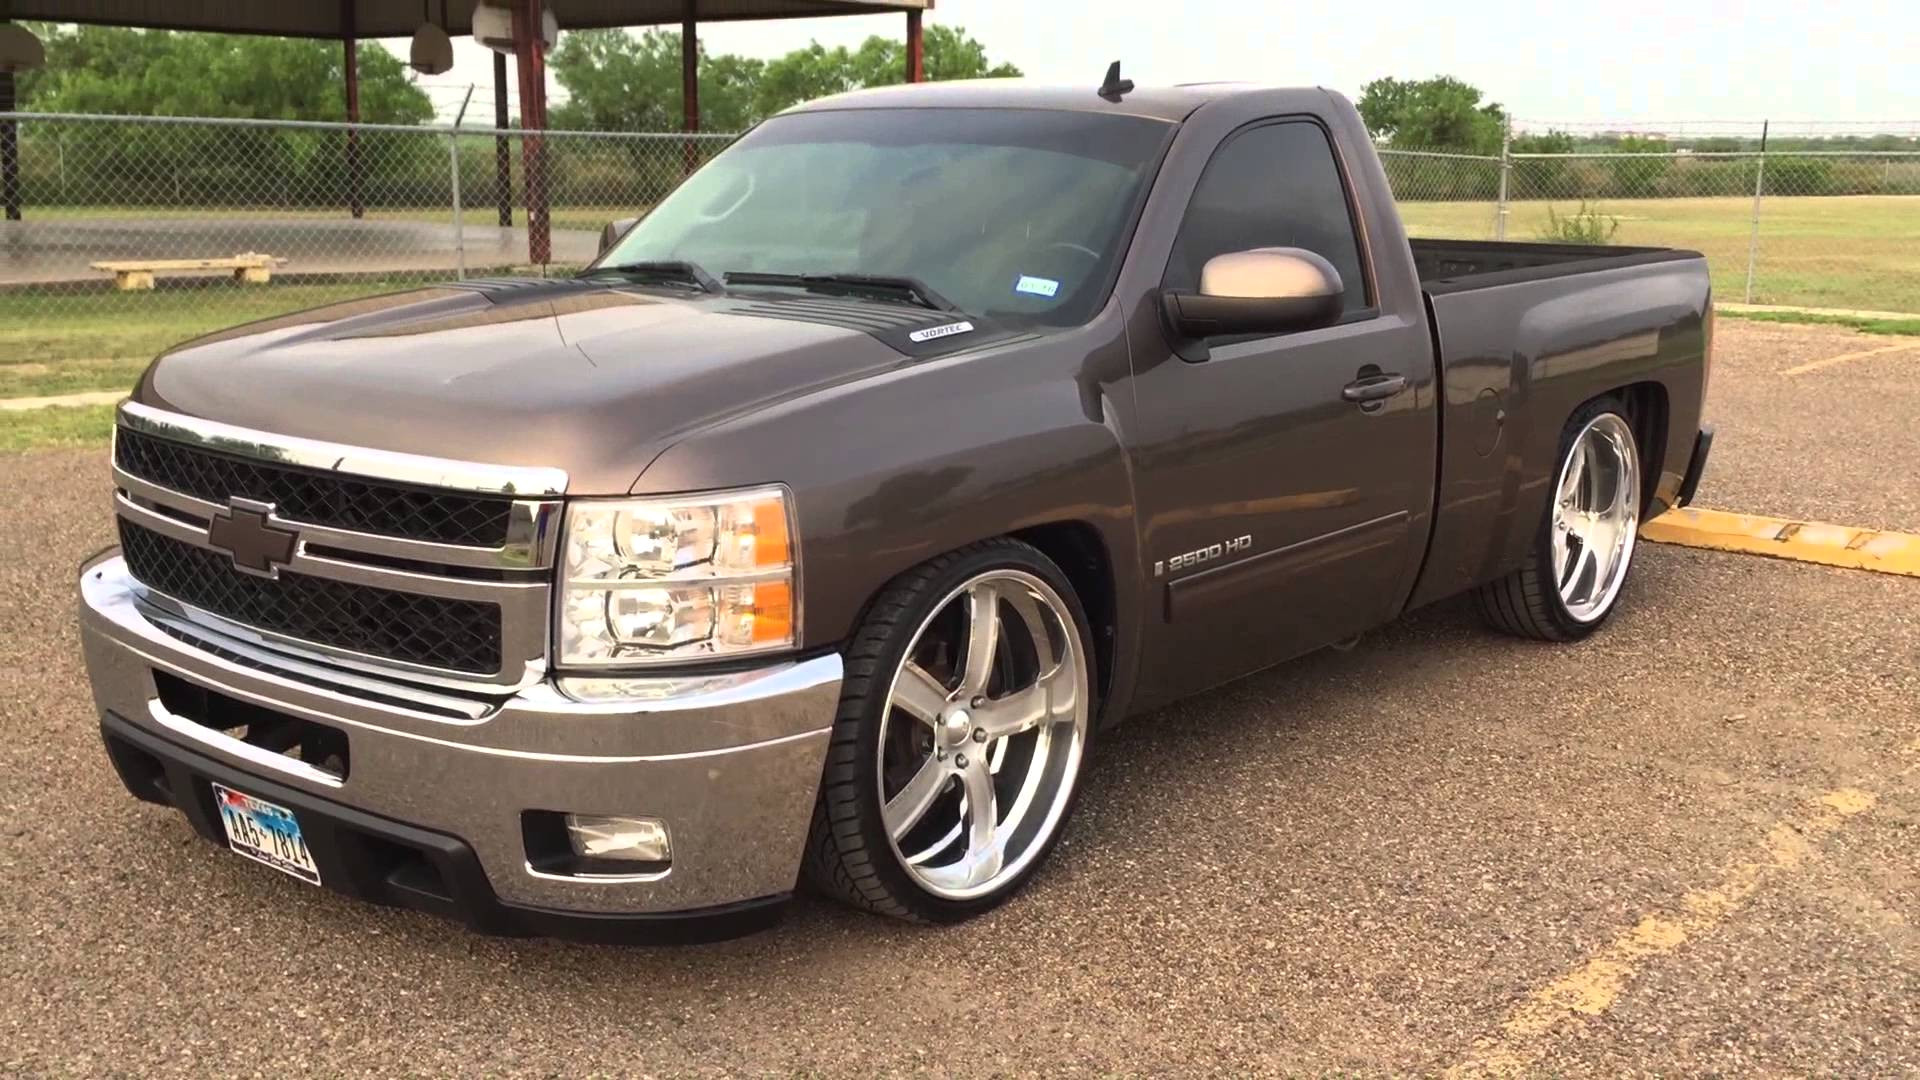 6 8 Dropped On 24 In Intro Flow Wheels With Lowered Single Cab Silverado An...